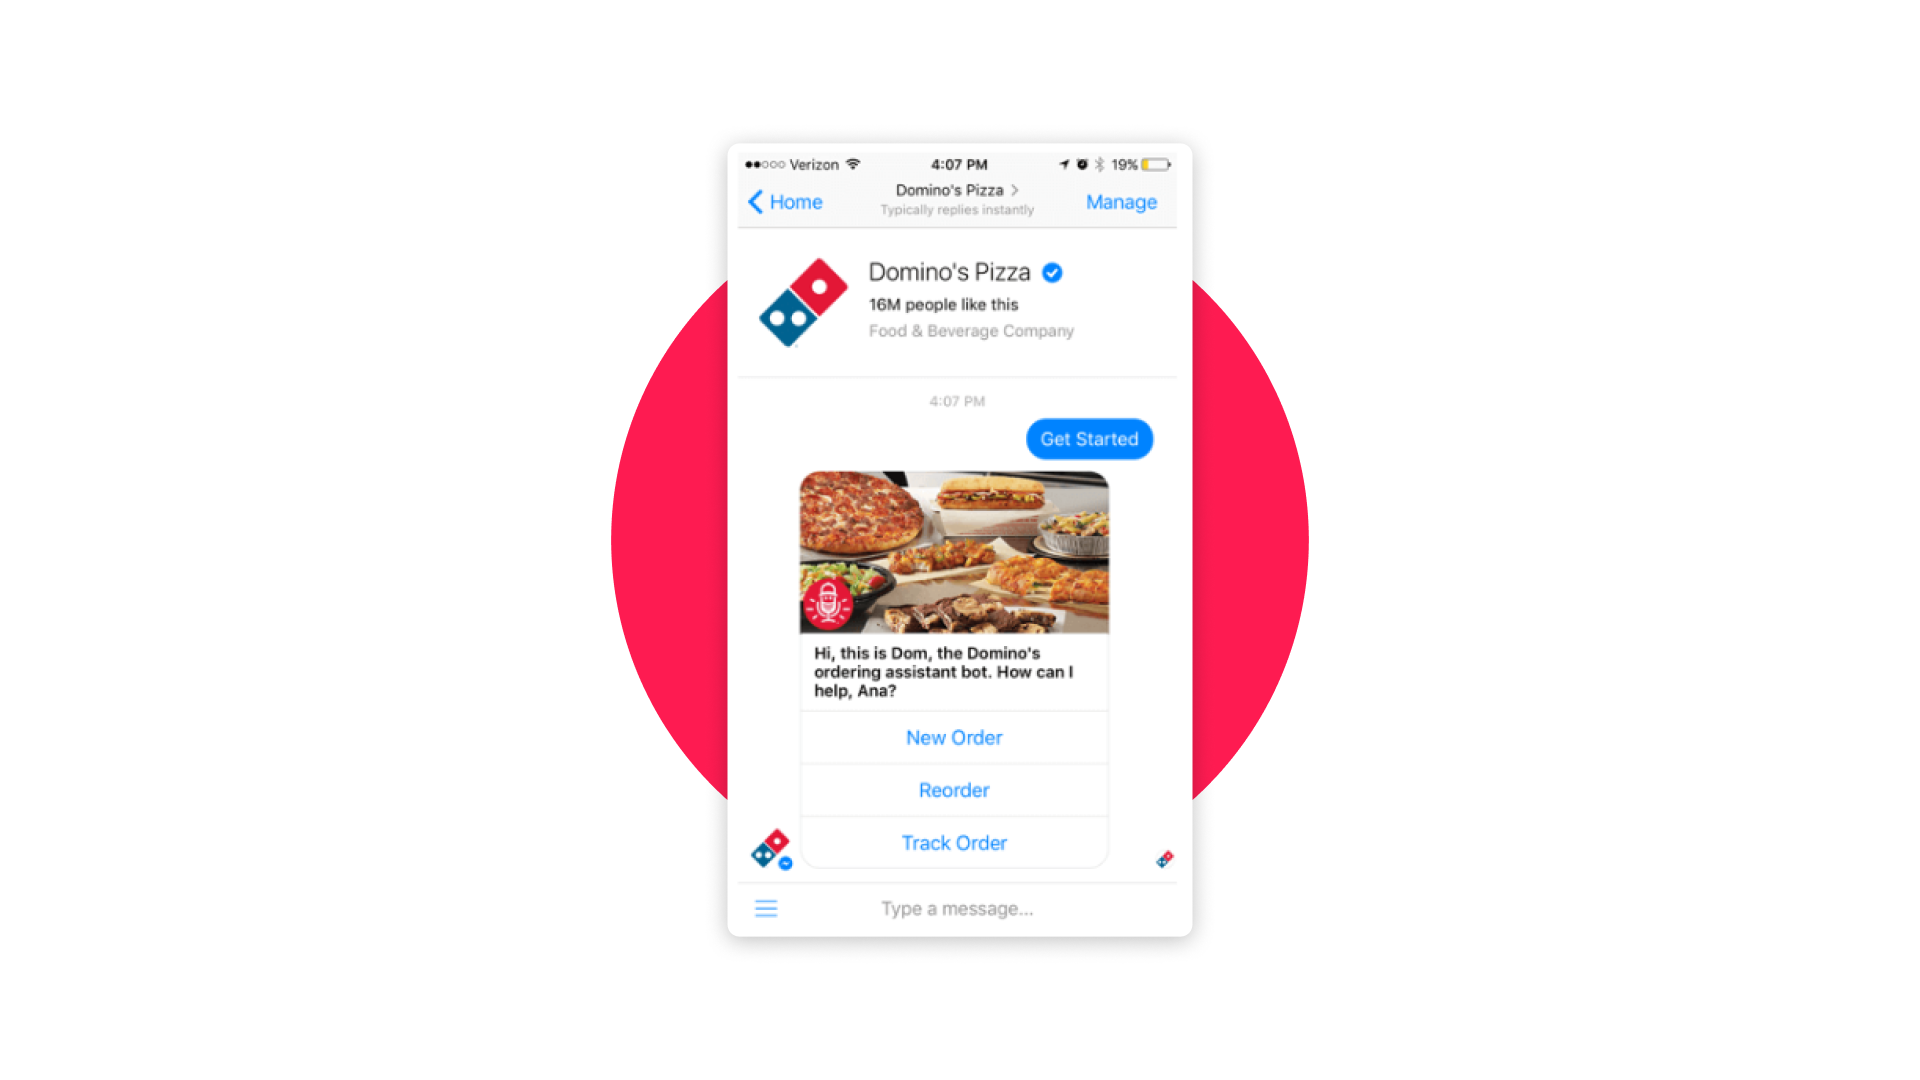 Domino's Pizza chatbot